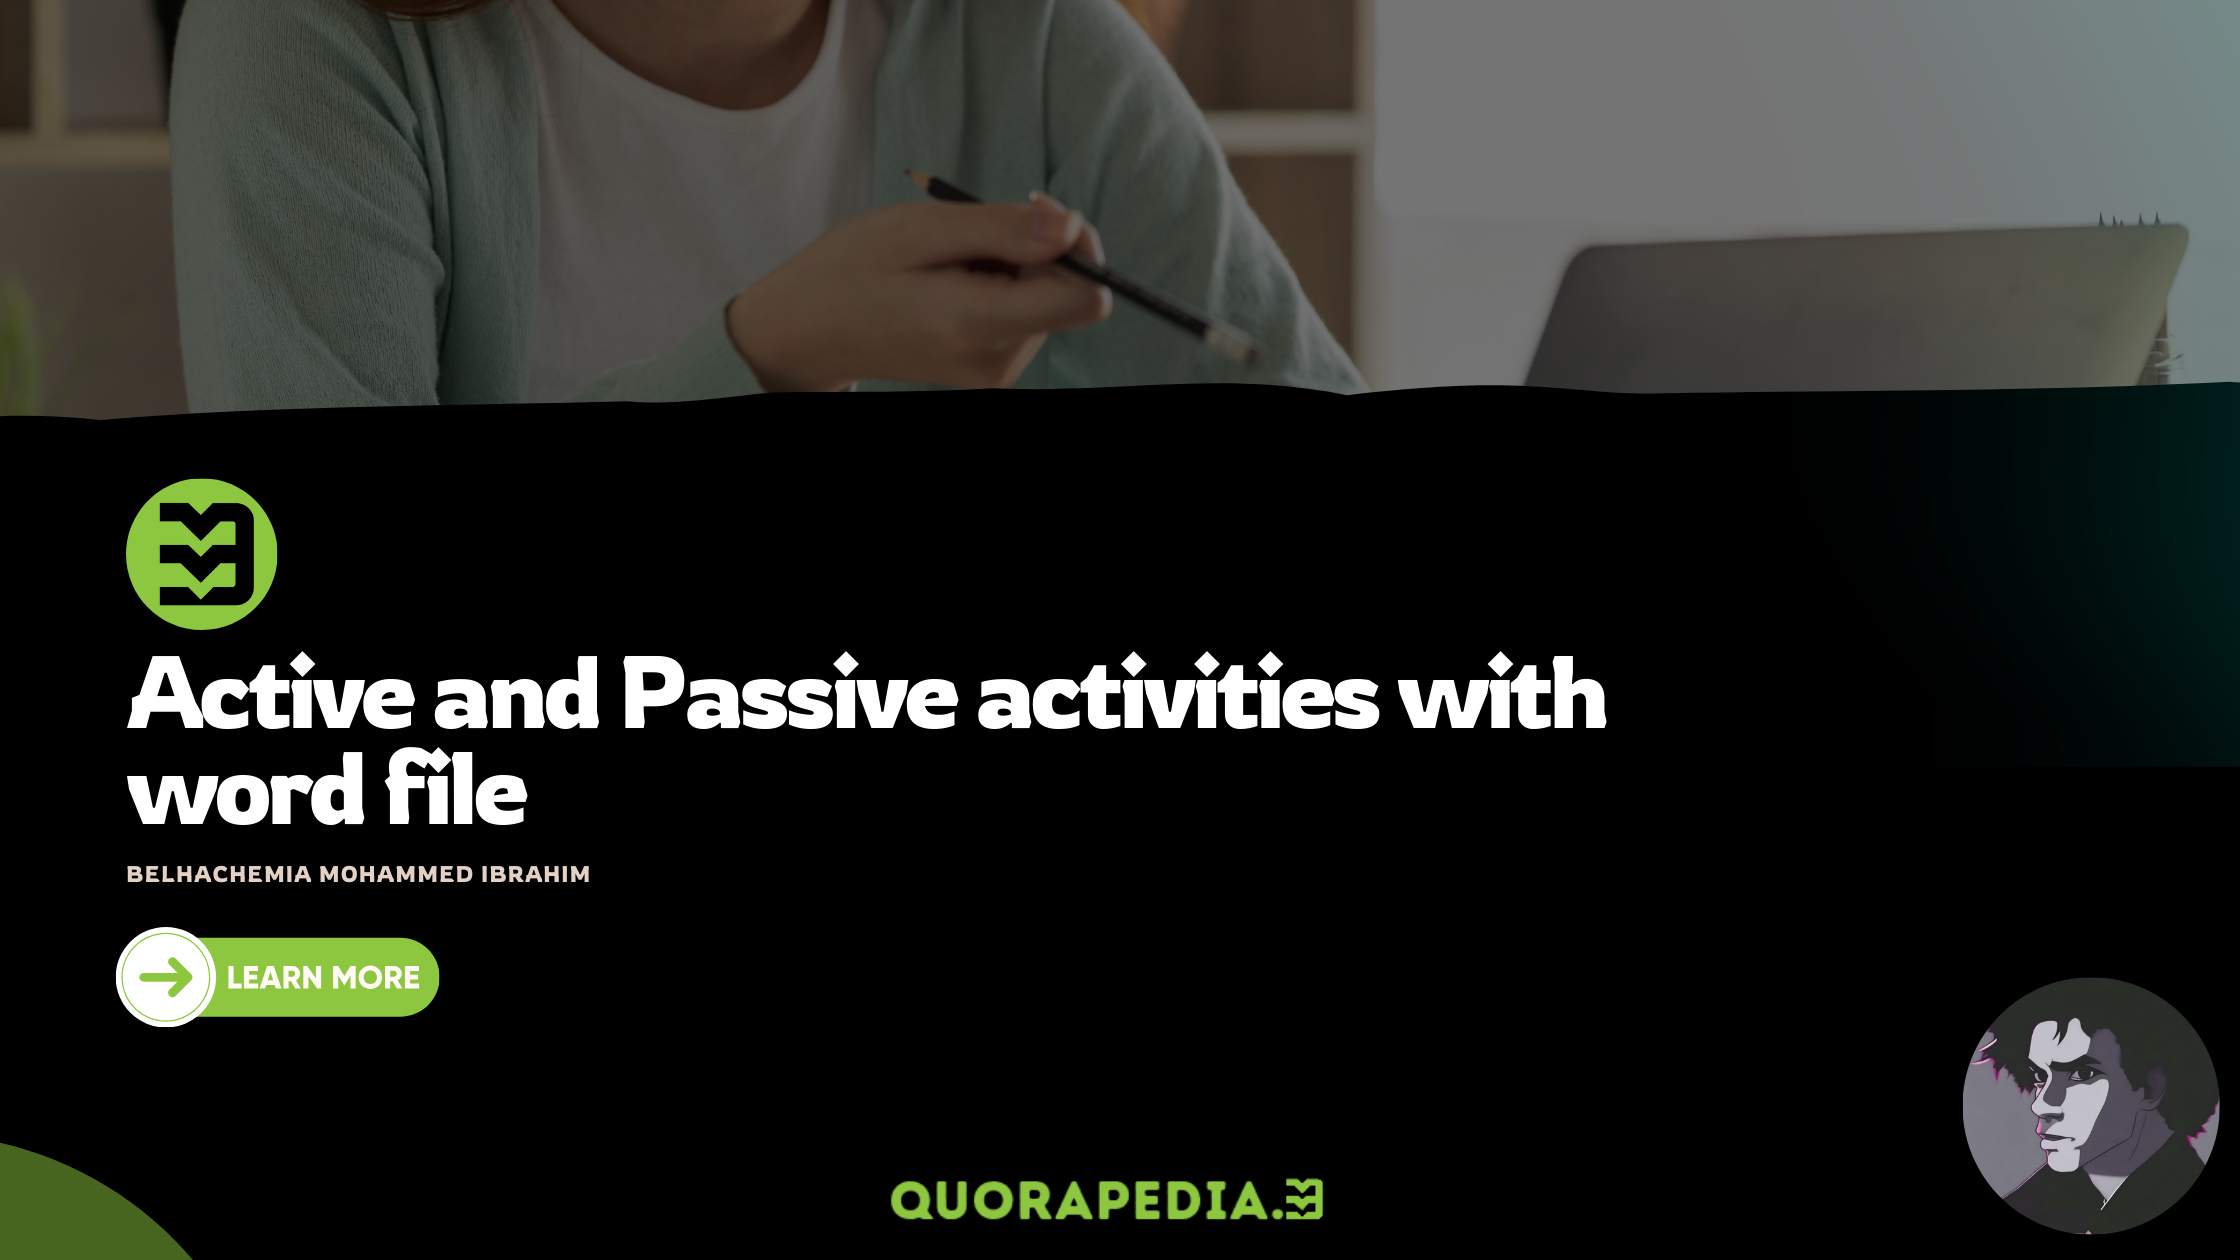 Active and Passive activities with word file